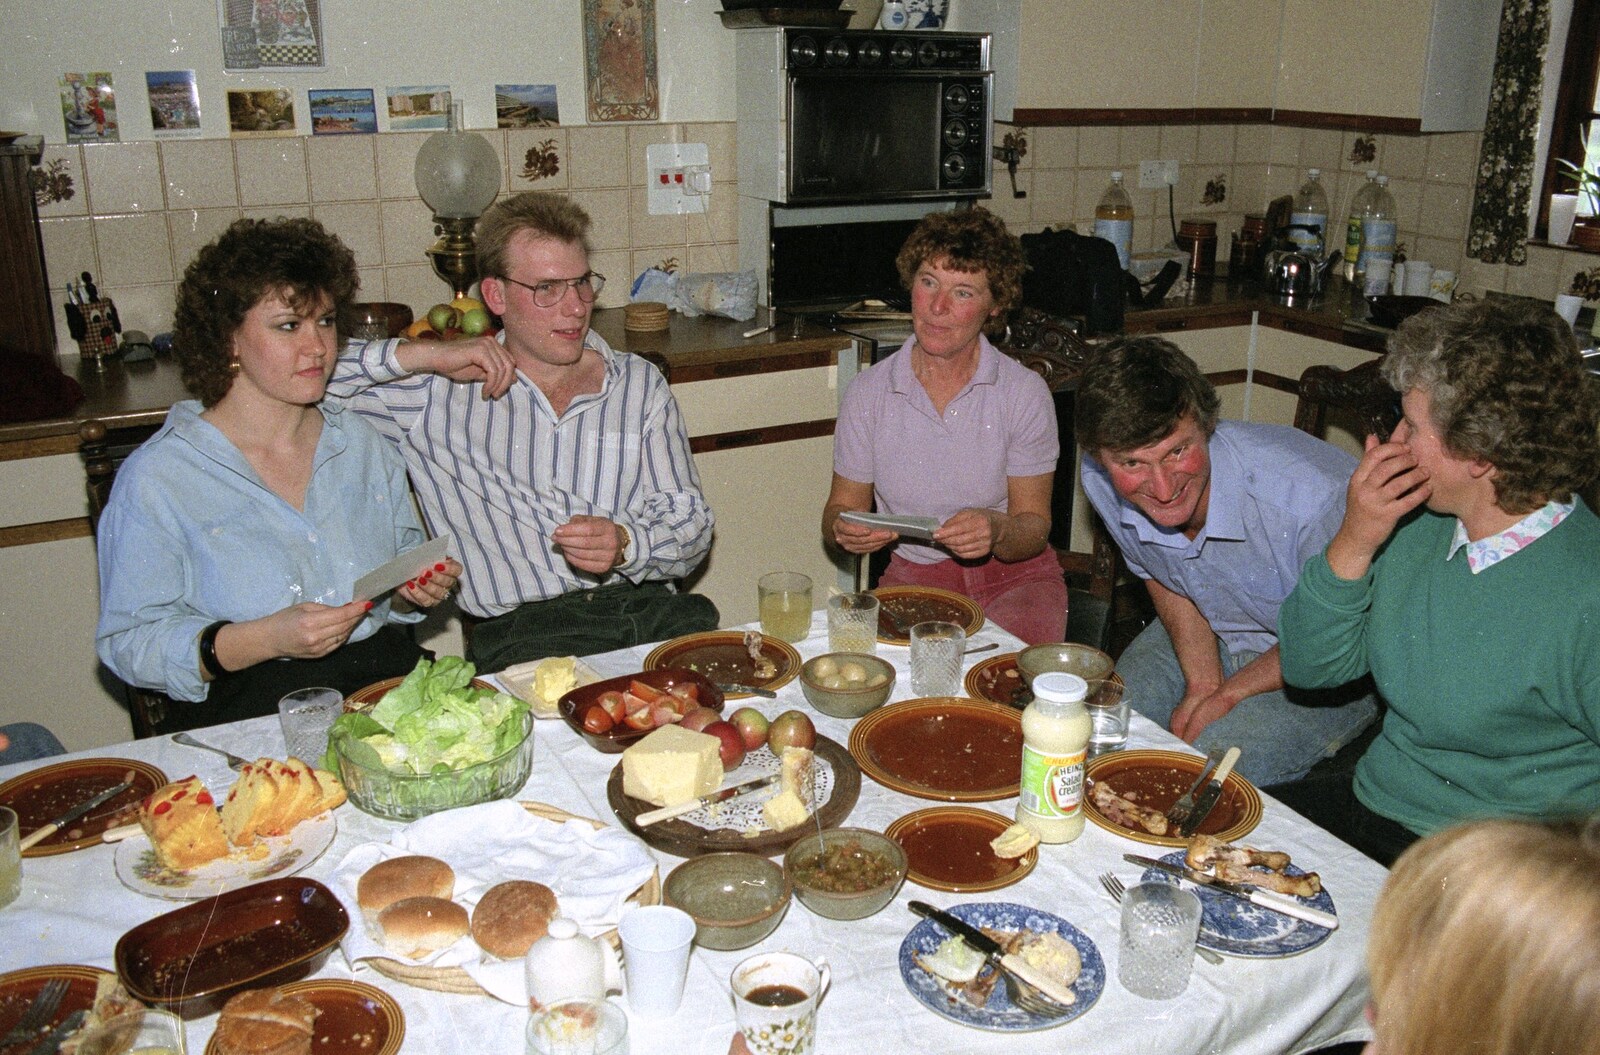 A spot of lunch from The Annual Cider Making Event, Stuston, Suffolk - 11th October 1990